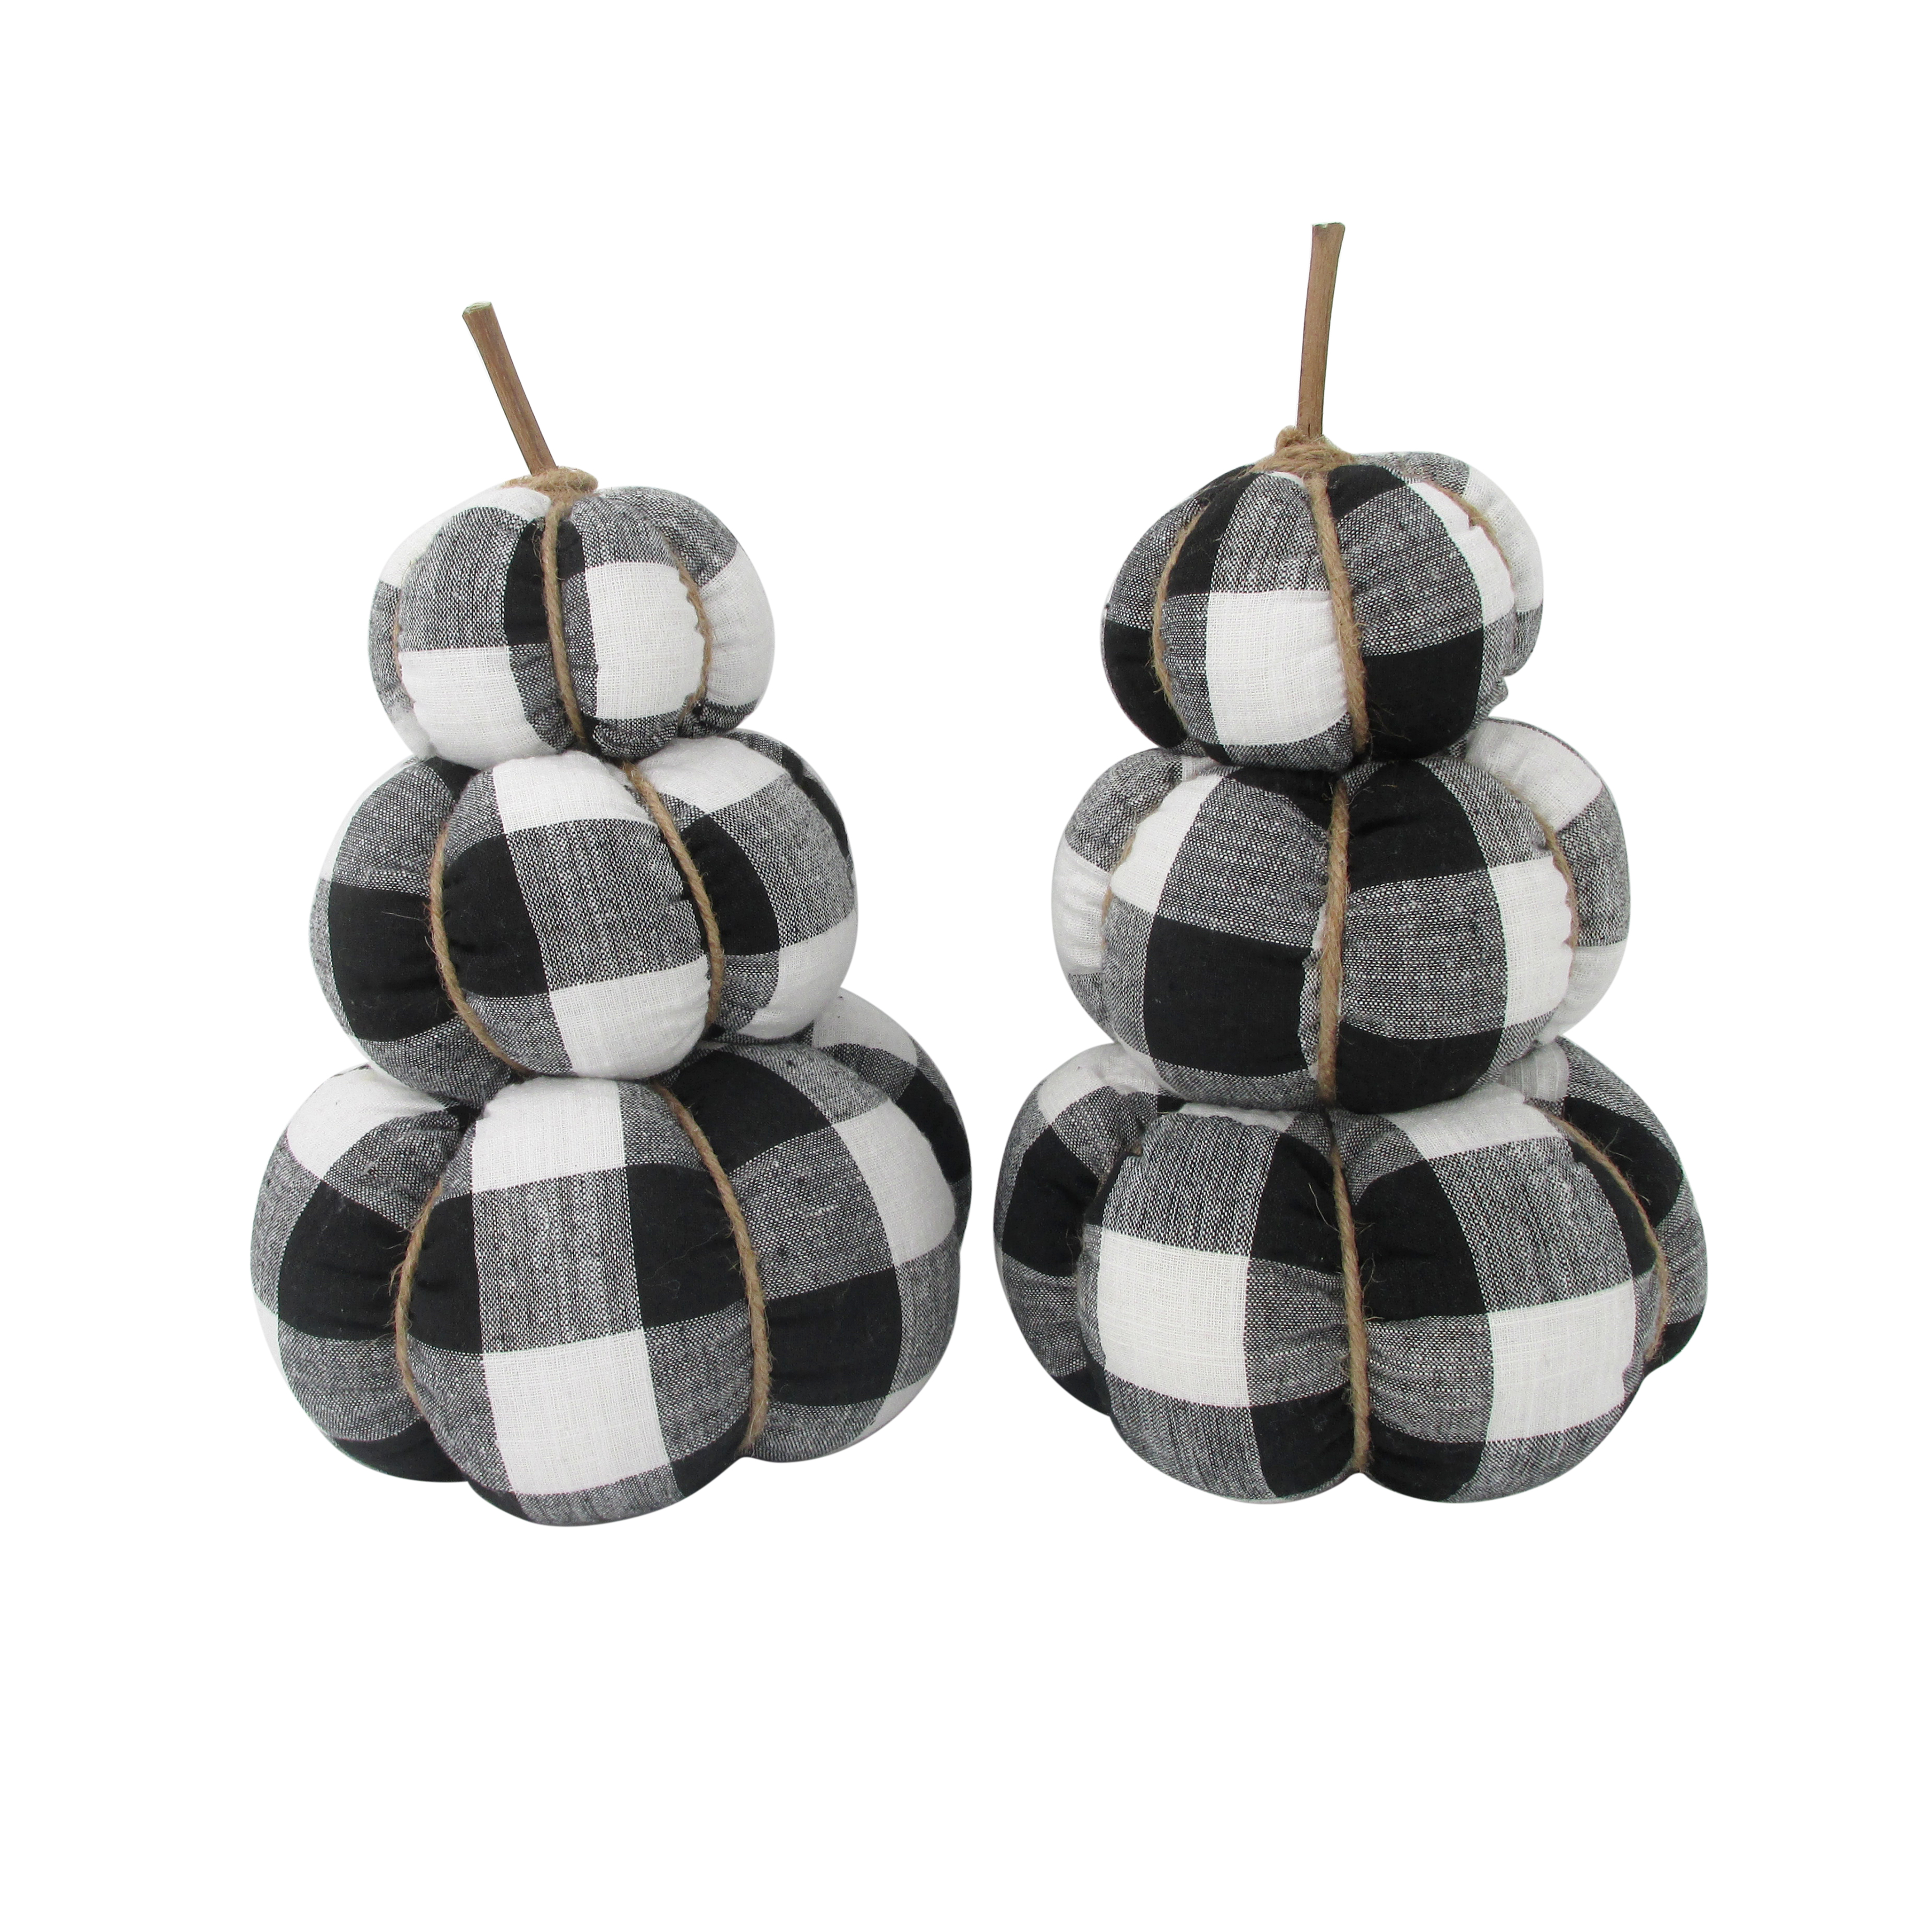 Way To Celebrate Harvest Plaid Stacked Fabric Pumpkins, Black, 2 Count - image 2 of 4